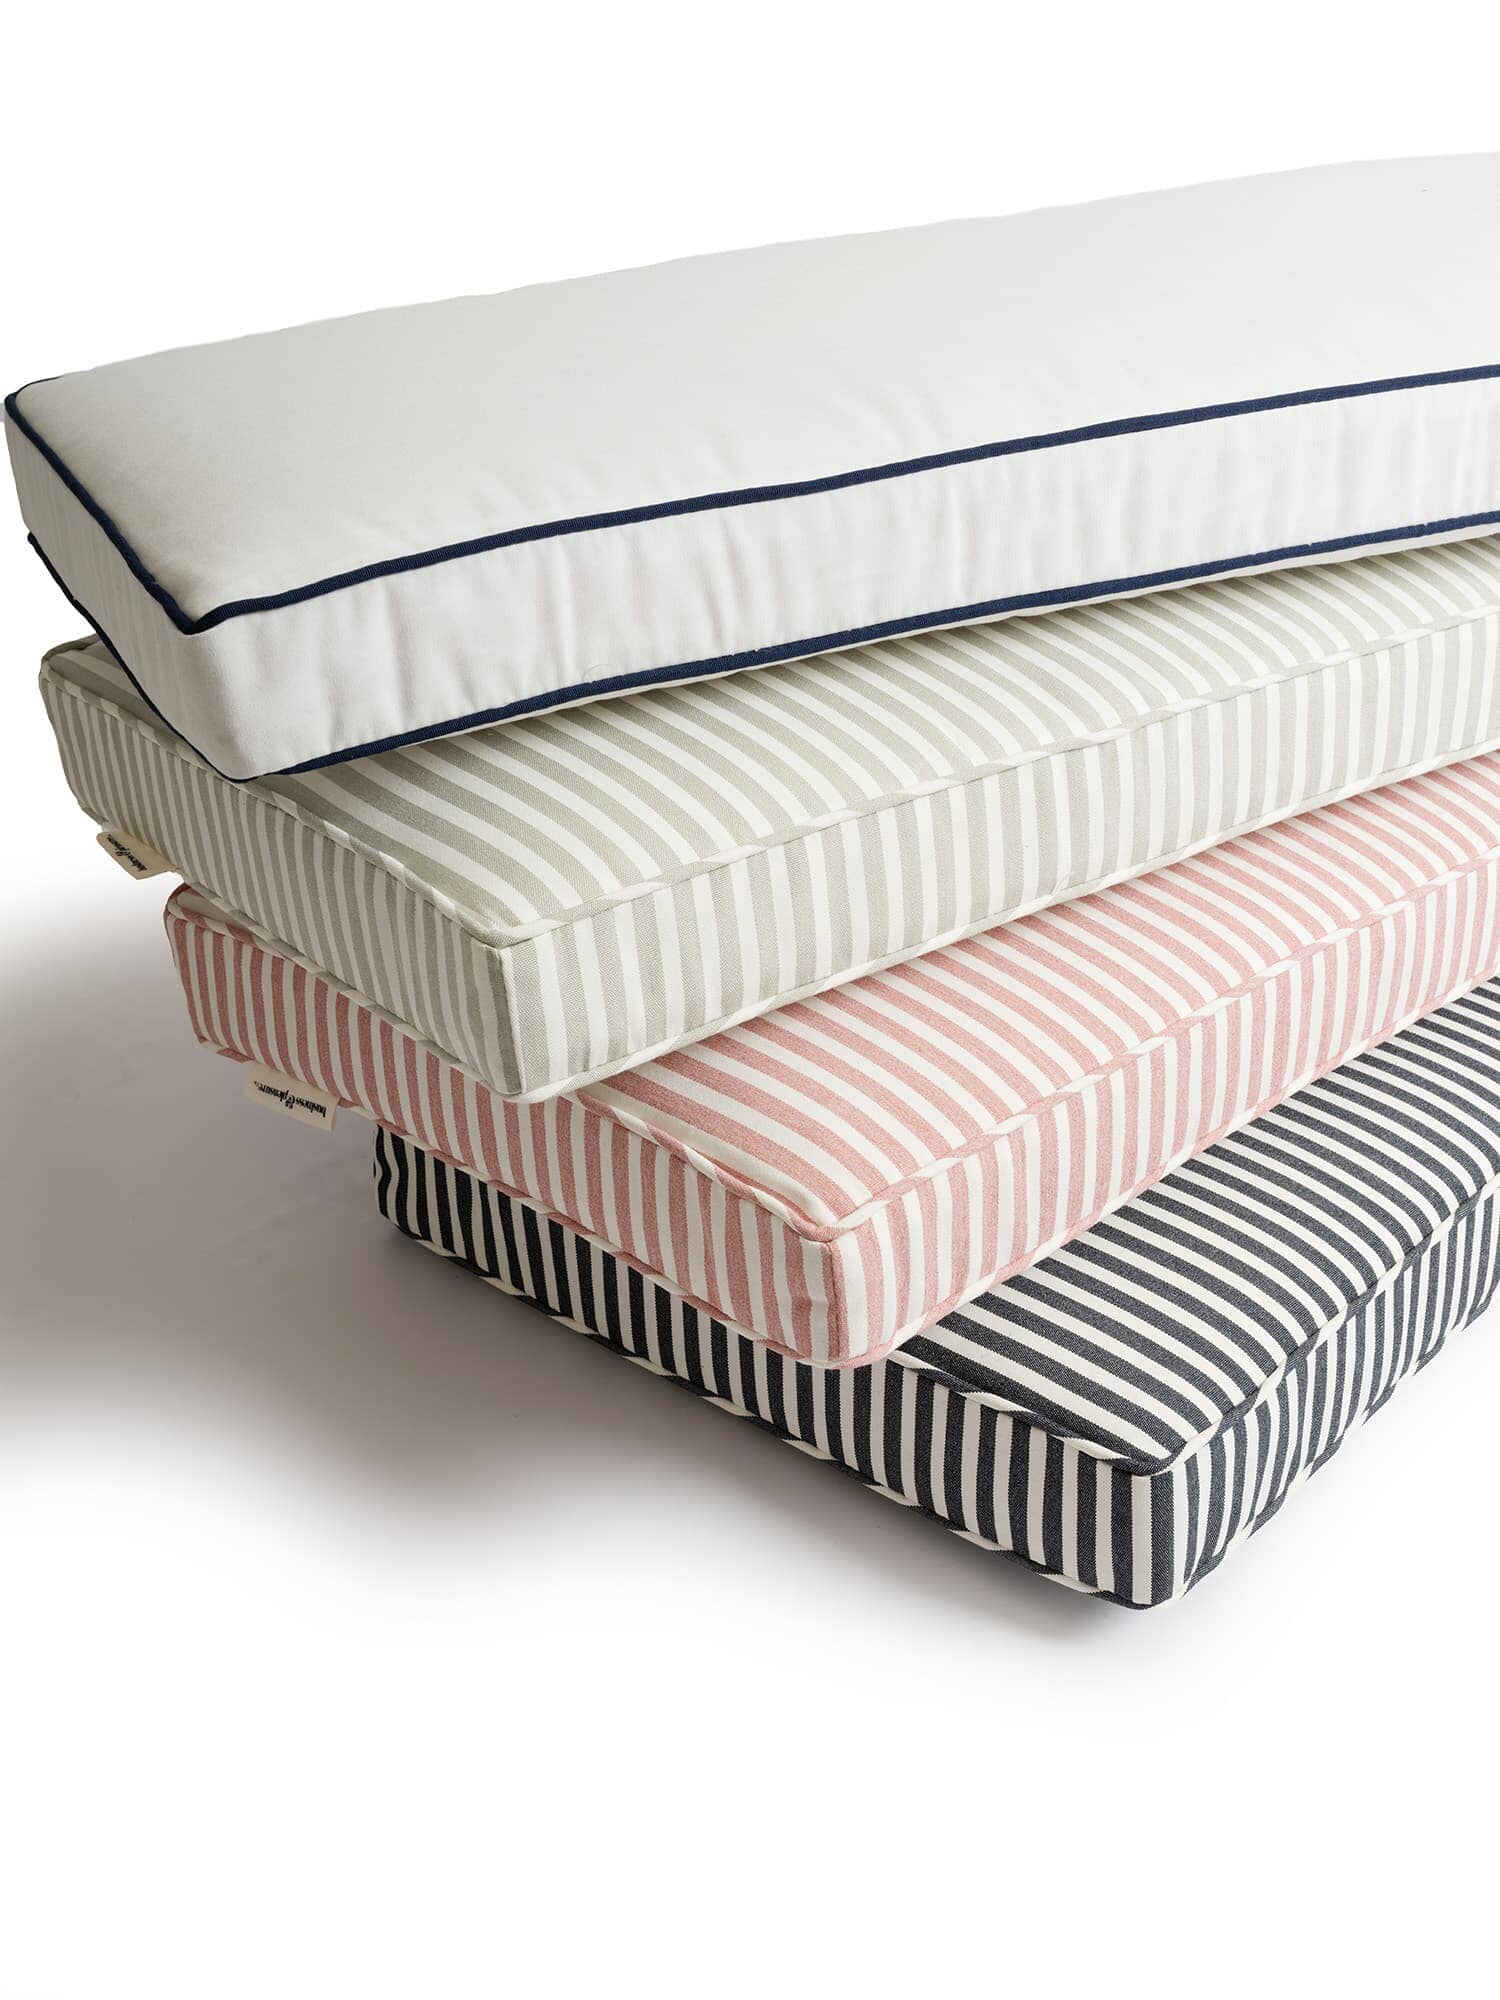 stack of 4 colored bench pillows